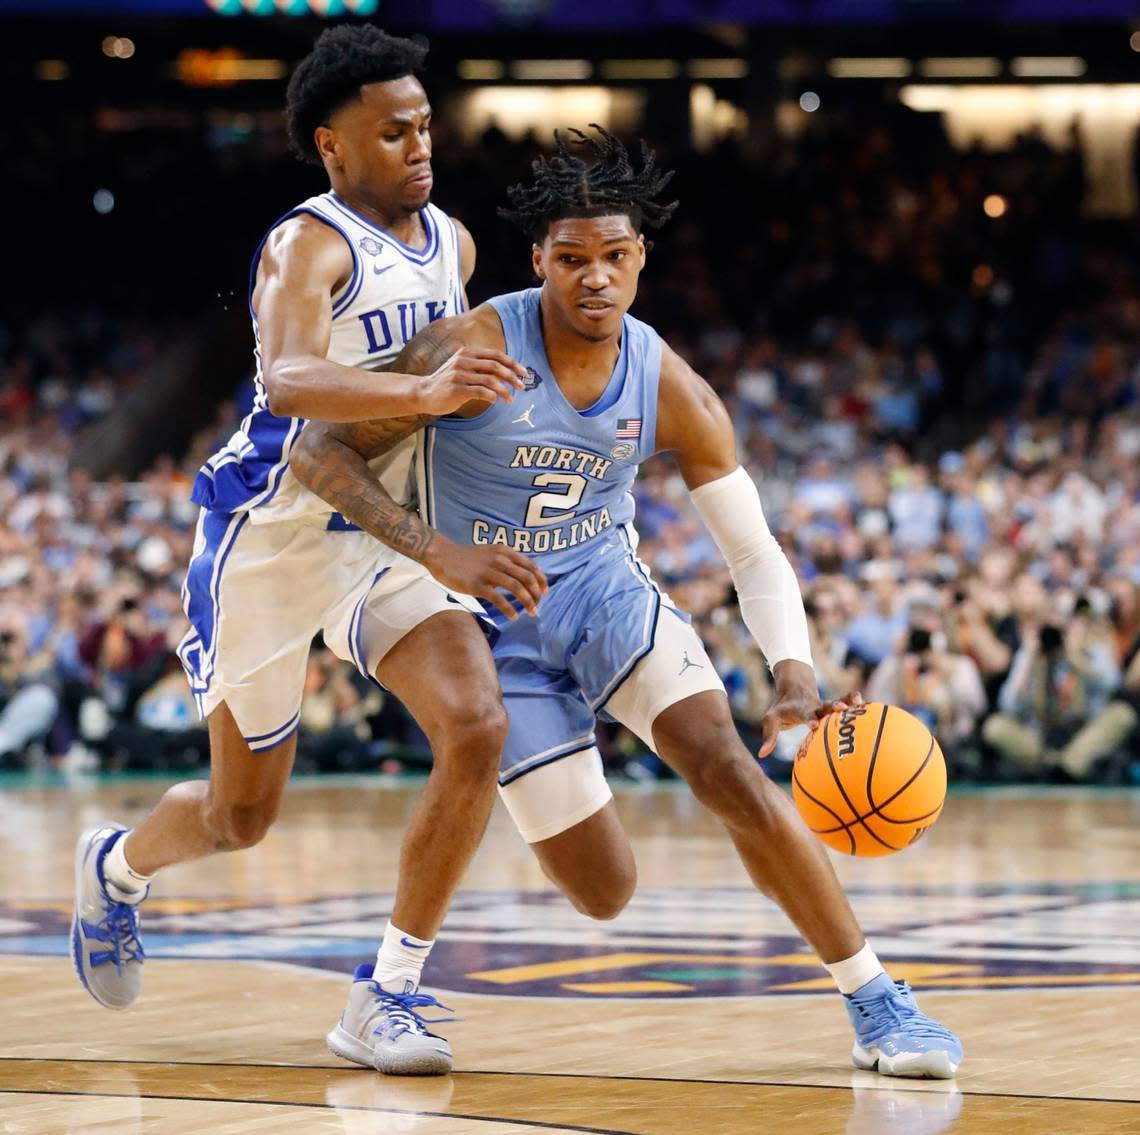 North Carolina’s Caleb Love (2) drives around Dukes Jeremy Roach (3) during the first half of Dukes game against UNC in the Final Four at Caesars Superdome in New Orleans, La., Saturday, April 2, 2022.